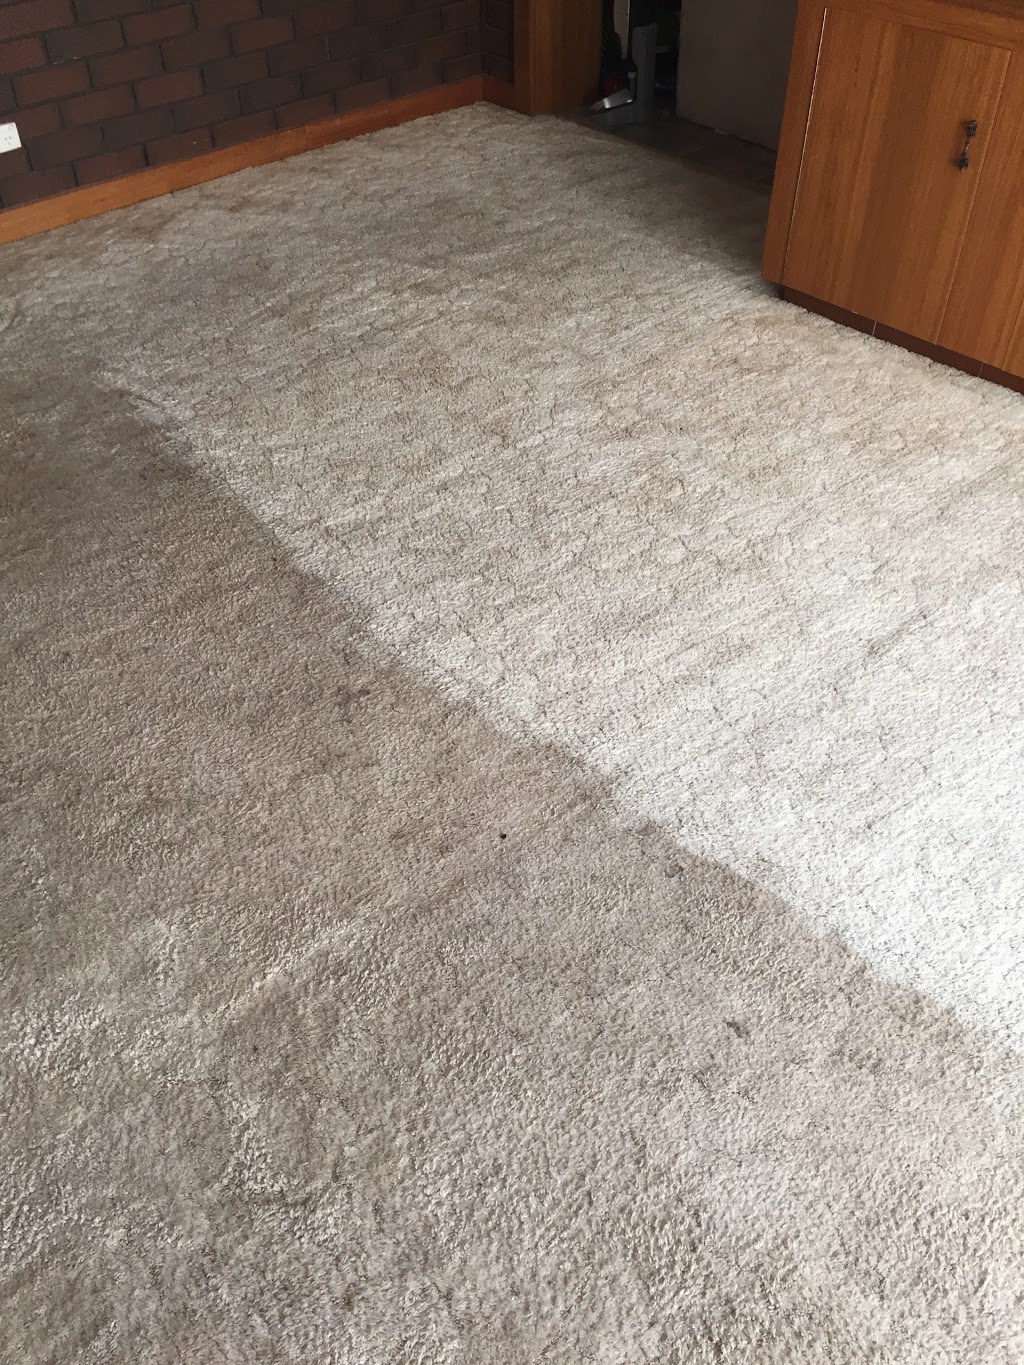 Carpet & Upholstery cleaning services. Port Augusta. | laundry | 23 Shirley St, Port Augusta SA 5700, Australia | 0417838269 OR +61 417 838 269